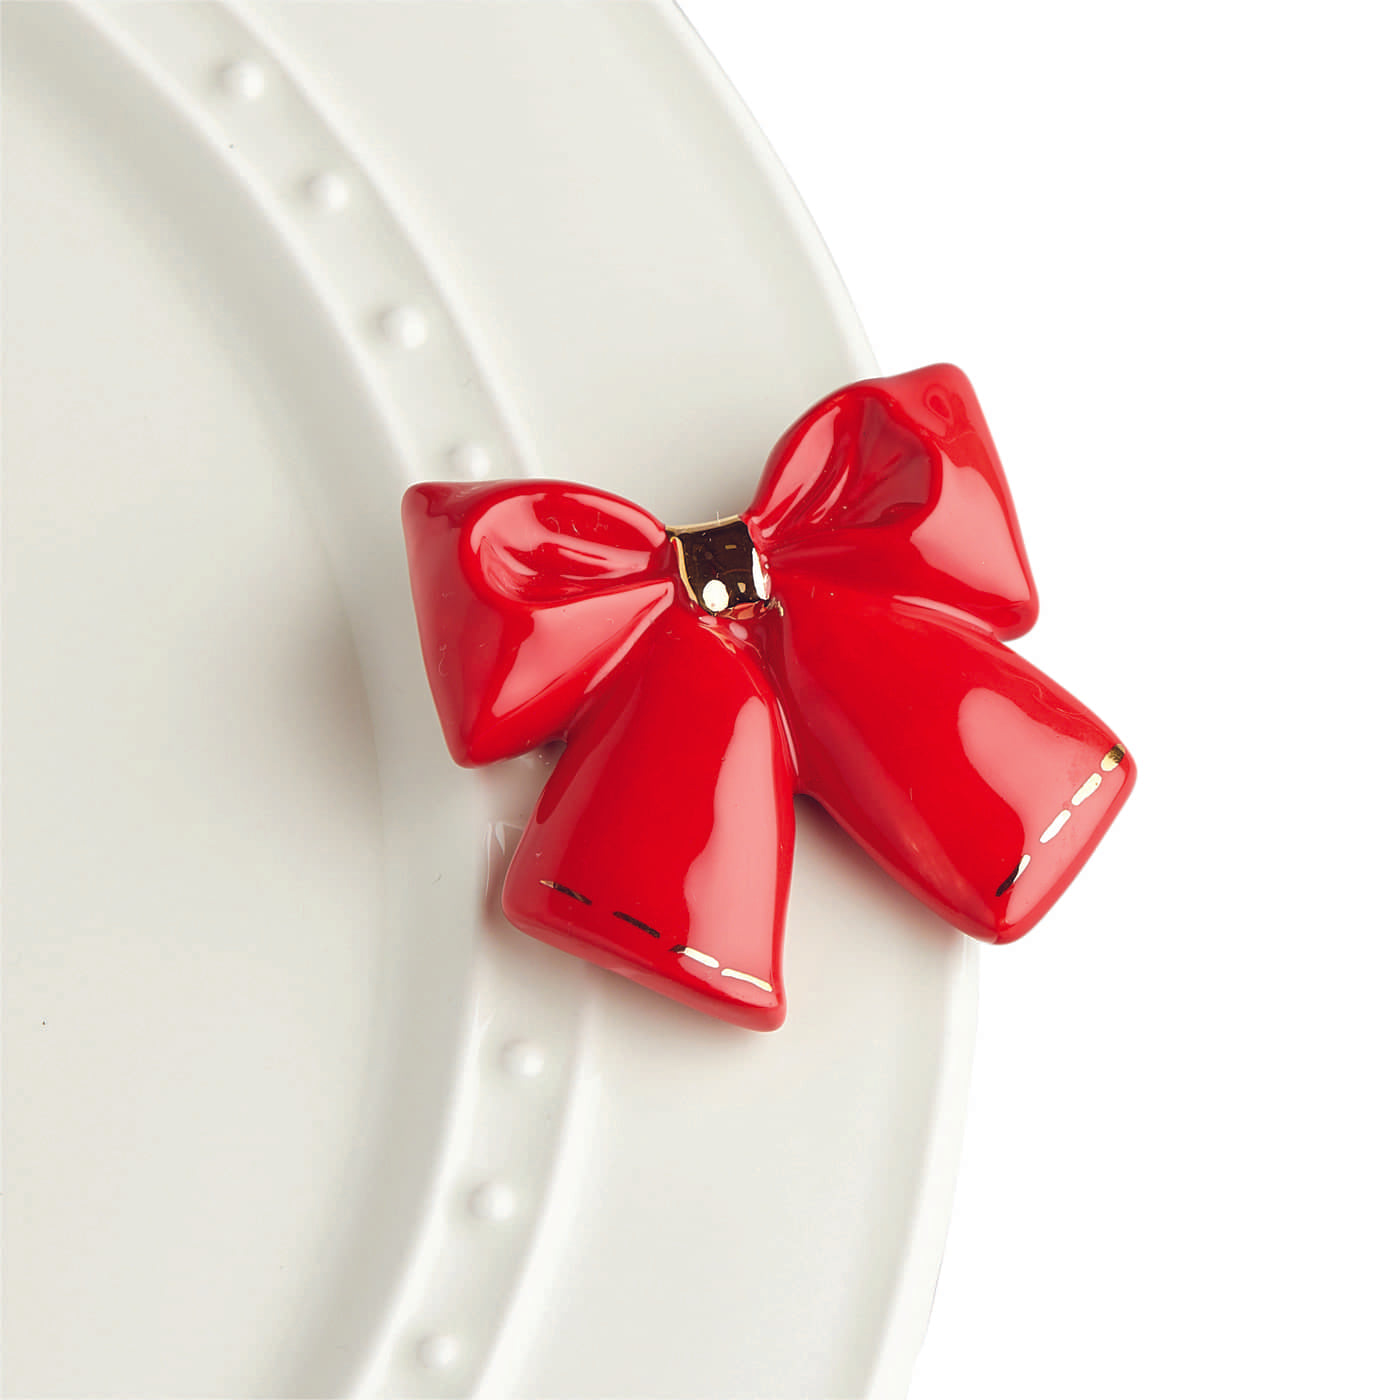 Your base pieces plus a crisp red bow mini make a complete package!  With Nora Fleming serving platters and minis you can dress up your dinnerware with interchangeable pieces for everyday serving. Add any Nora Fleming Mini to your favorite Nora Fleming platter or base for easy entertaining and for every occasion!  not dishwasher safe hand wash only ceramic coordinates with all Nora Fleming pieces